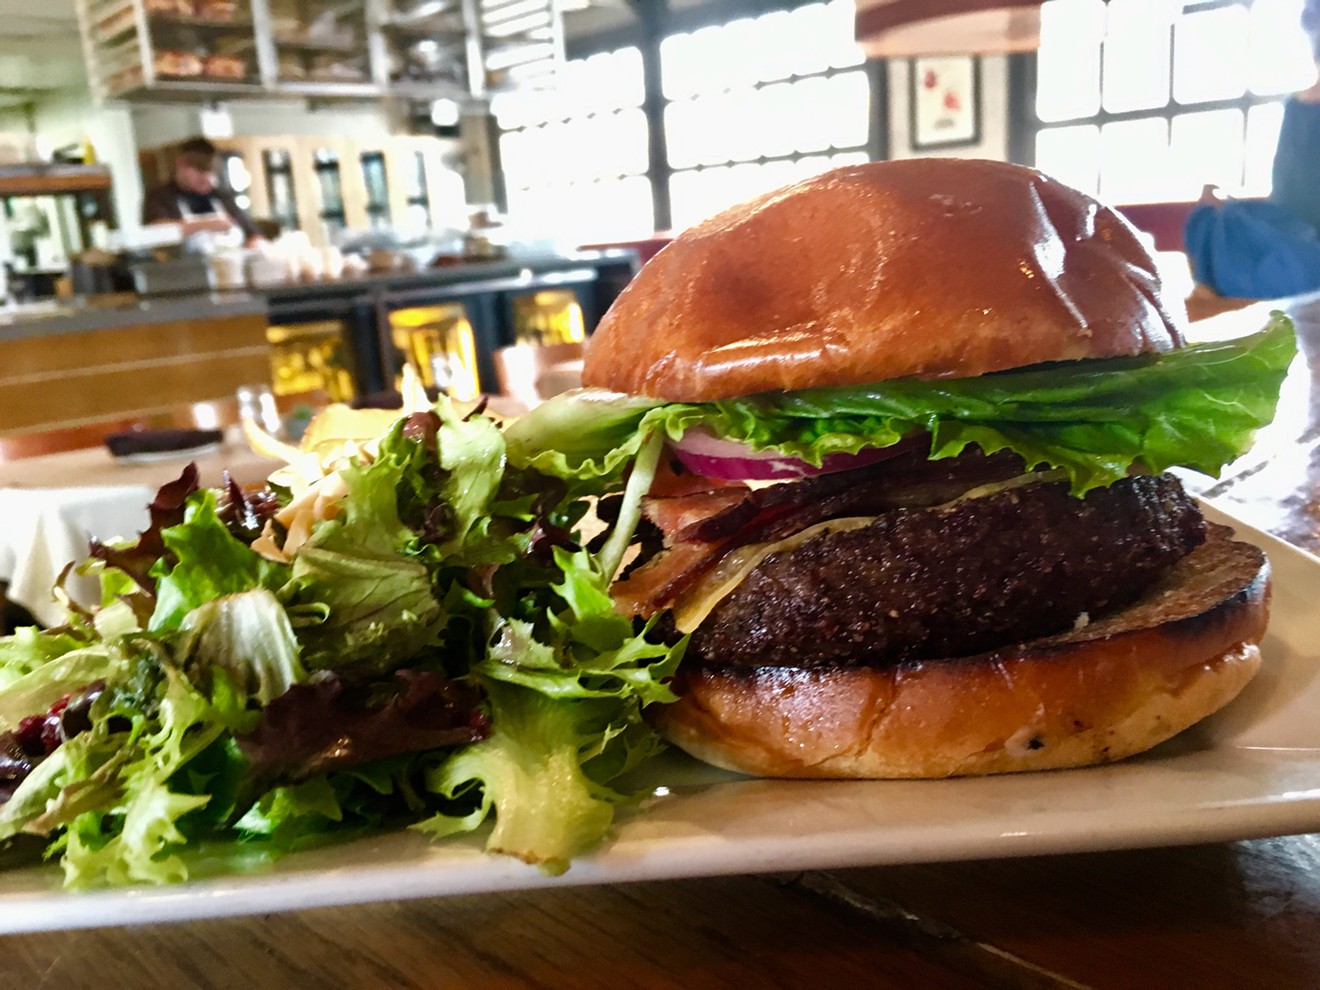 Bolsa's house-ground burger with bacon, cheese, red onion, lettuce and tomato for $15